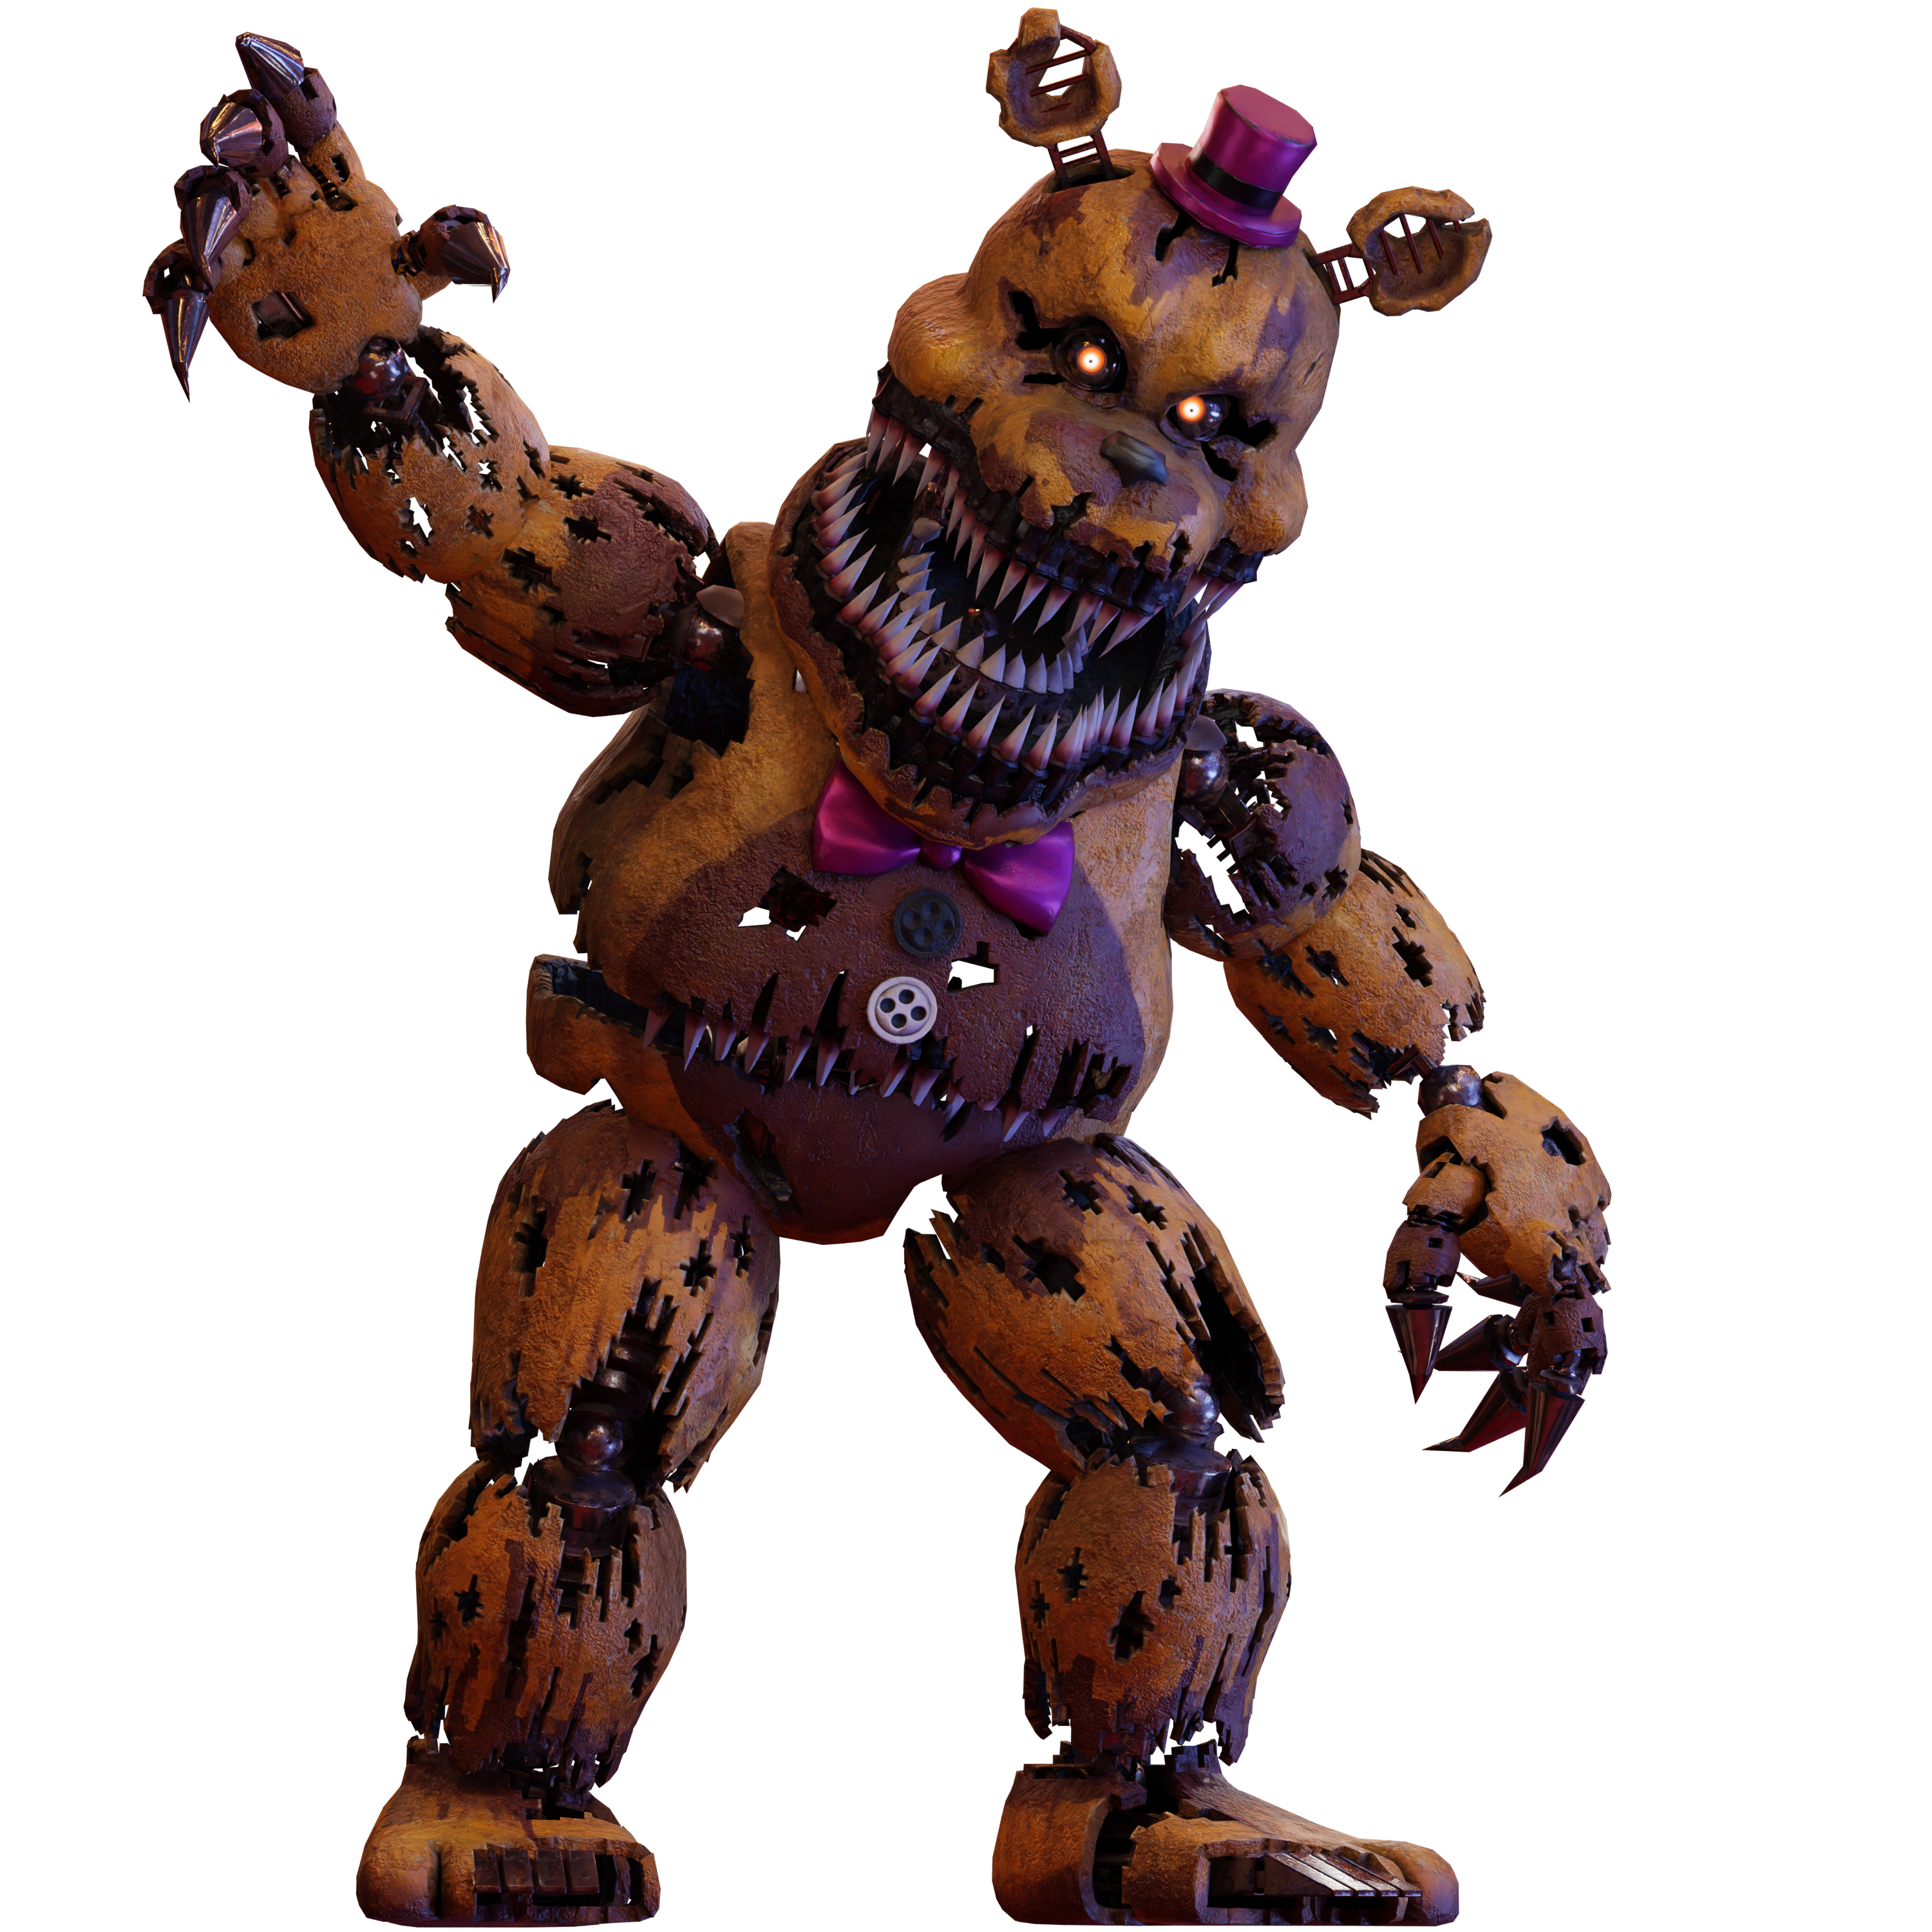 PC / Computer - Five Nights at Freddy's VR: Help Wanted - Freddy Fazbear -  The Models Resource